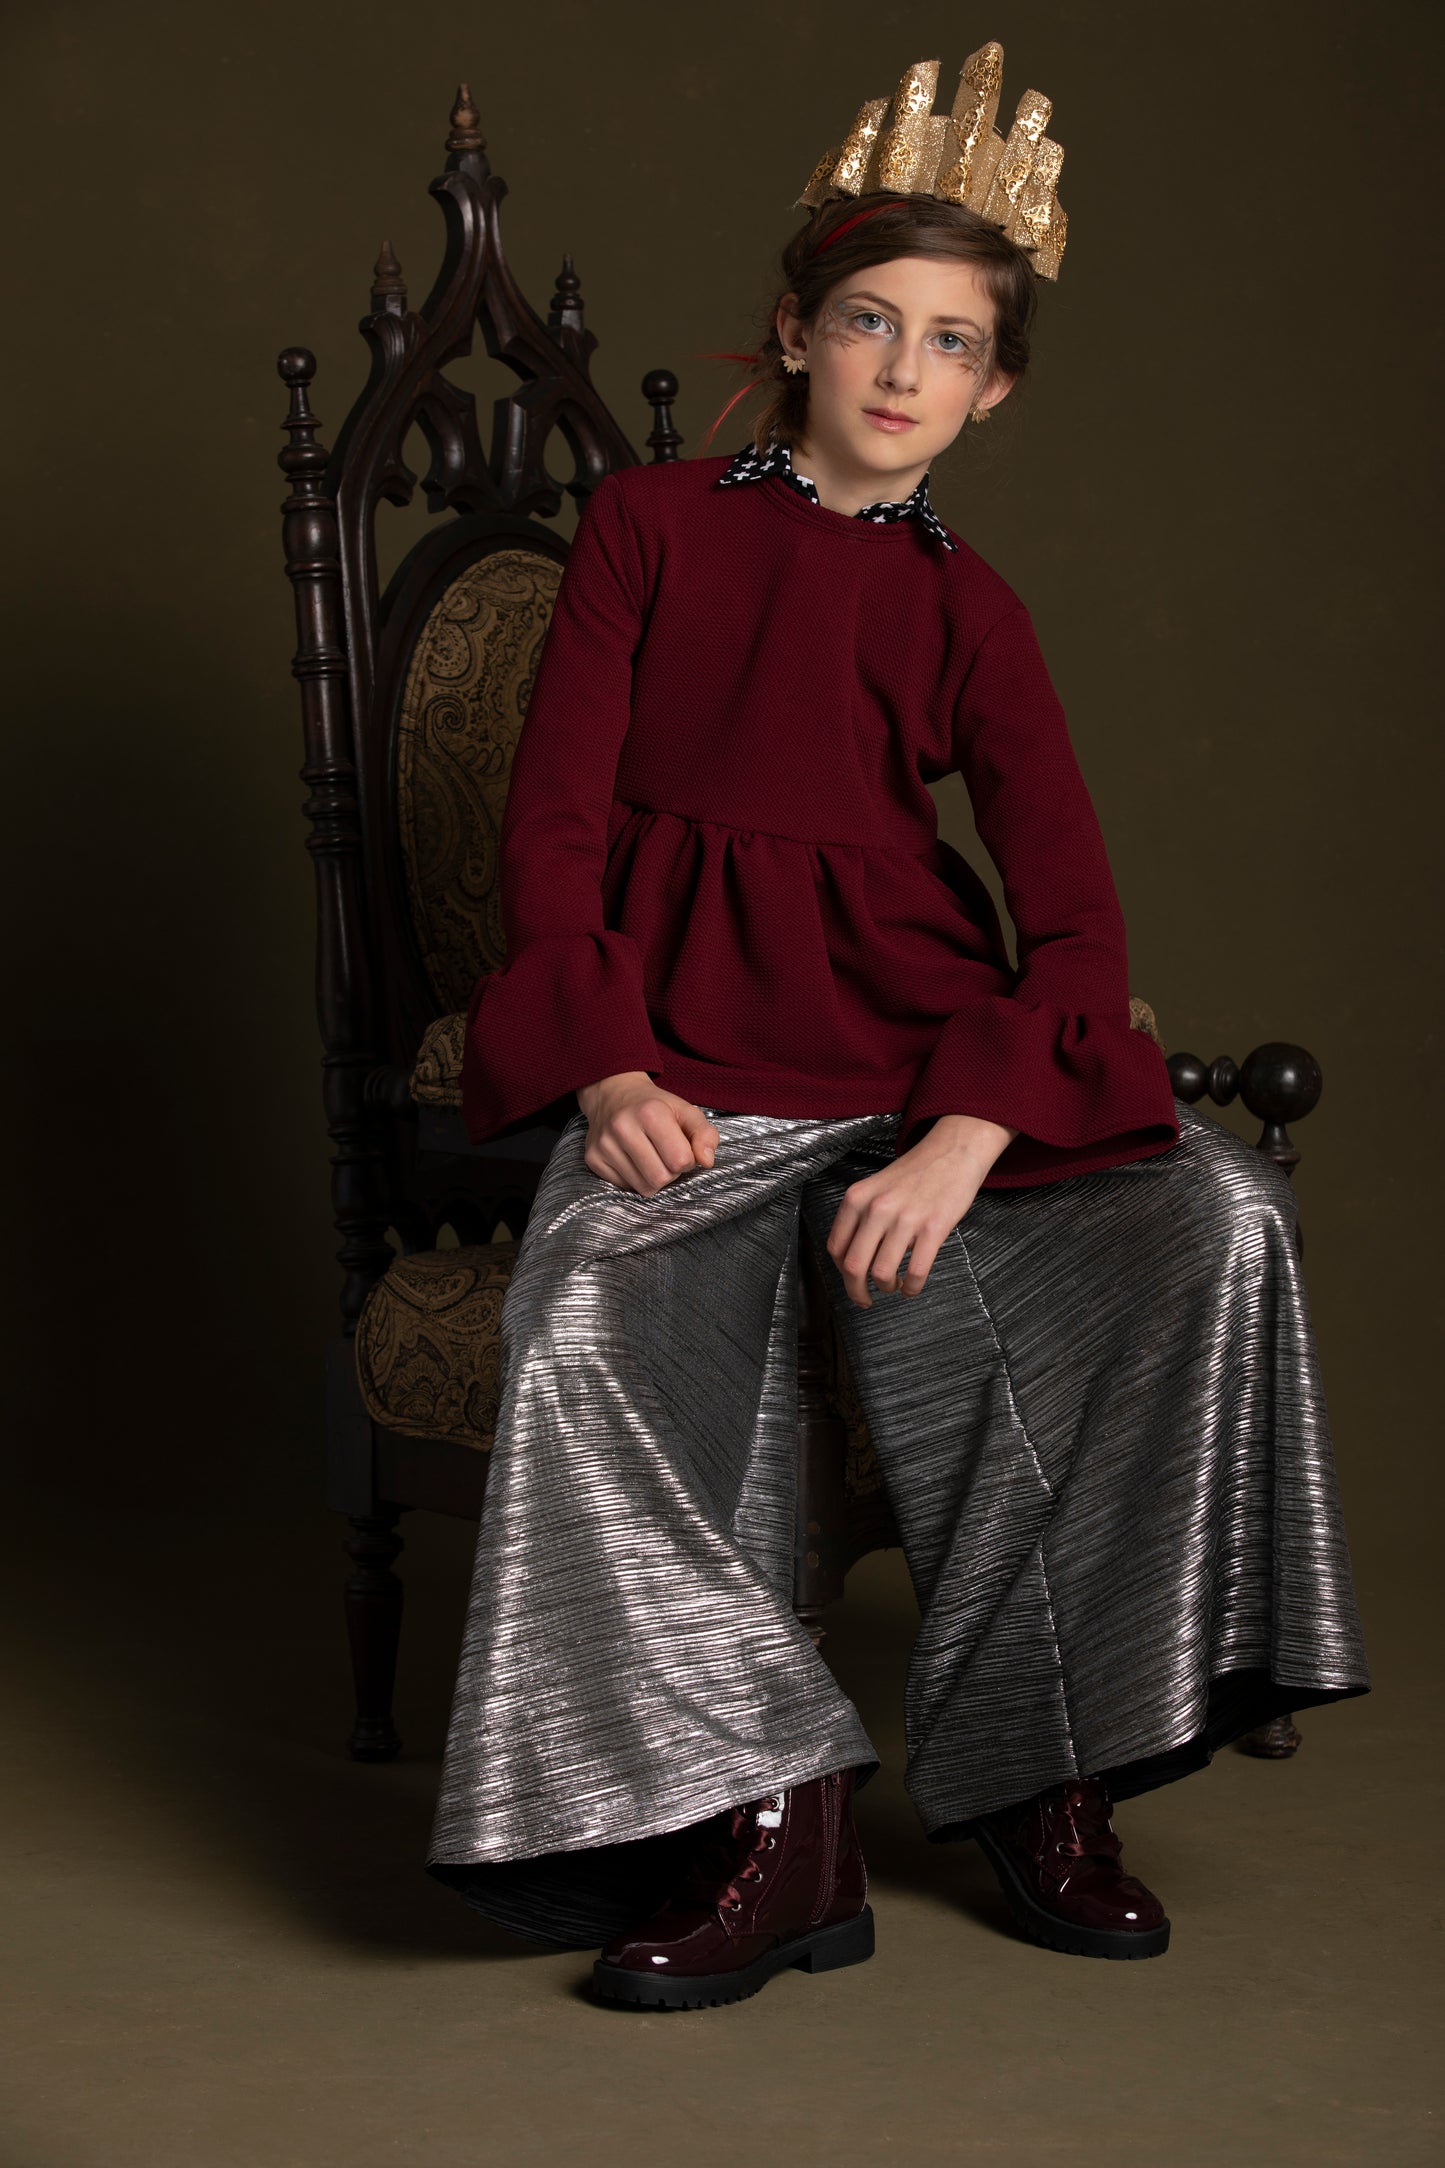 Sitting on her throne this queen wears her burgundy knit tip over her snap down with metallic pants